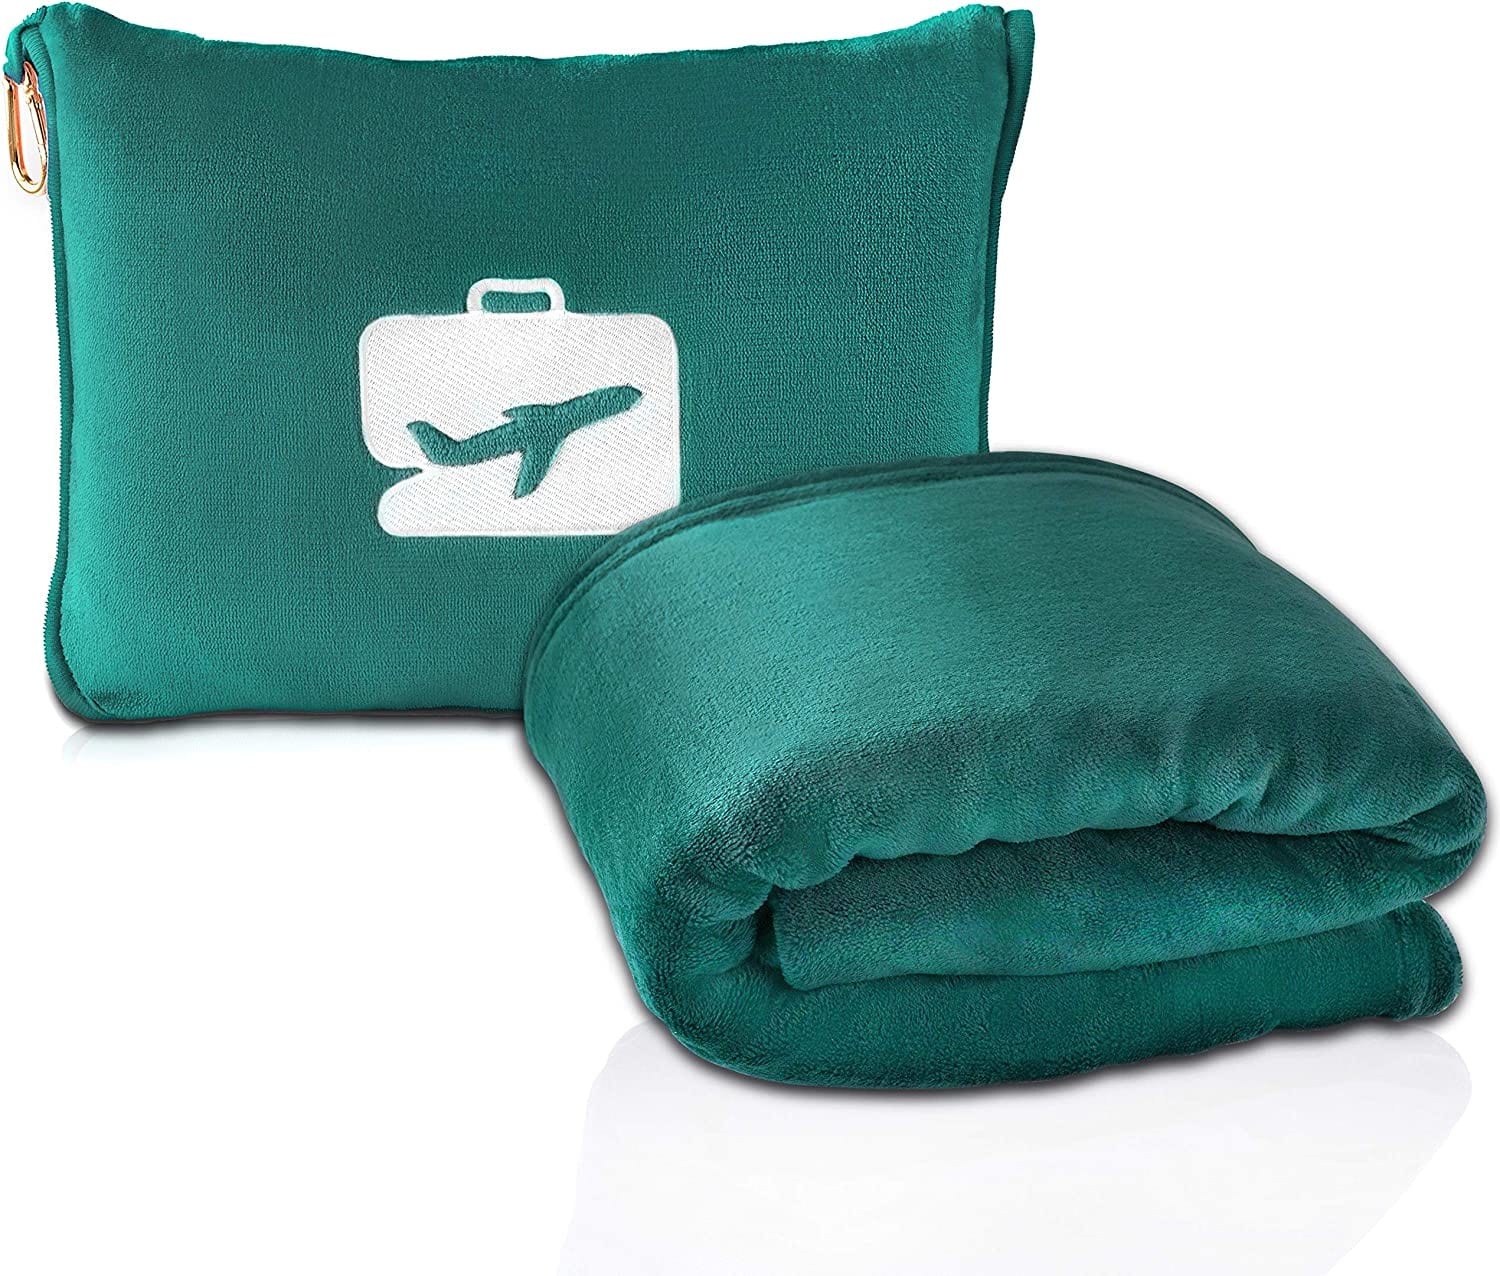 Travel pillow that doubles as a blanket